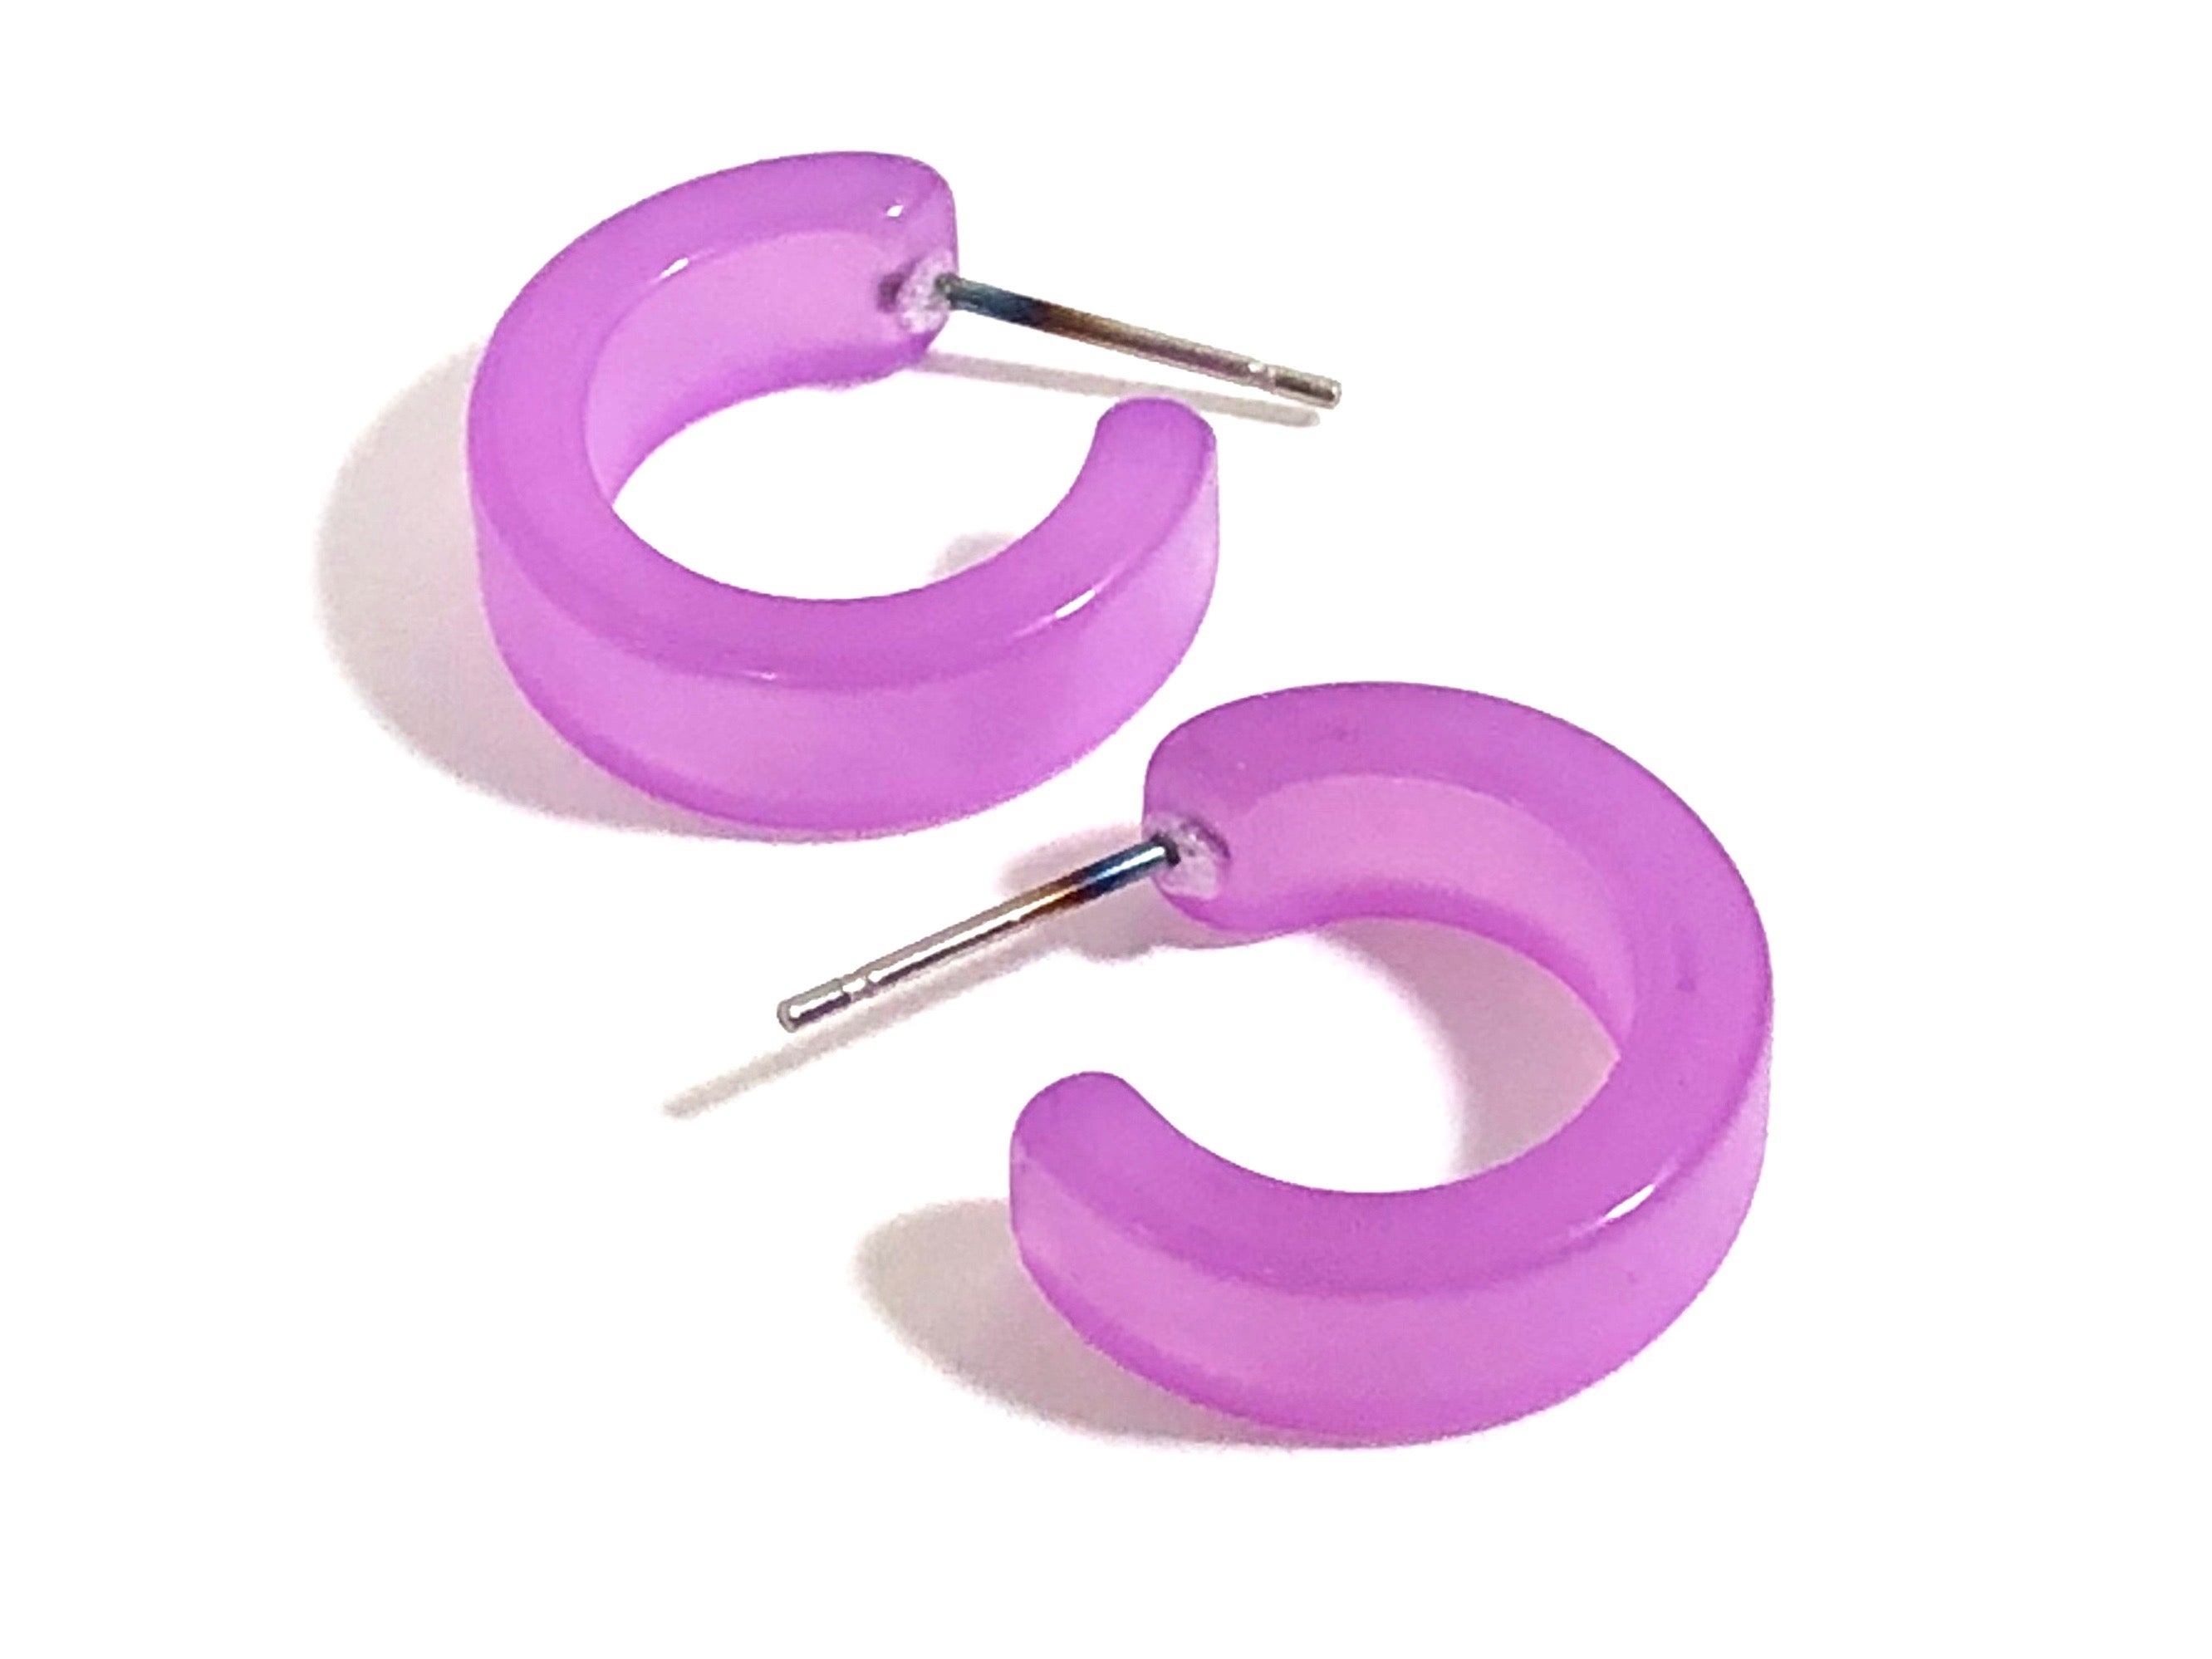 lilac earrings lucite